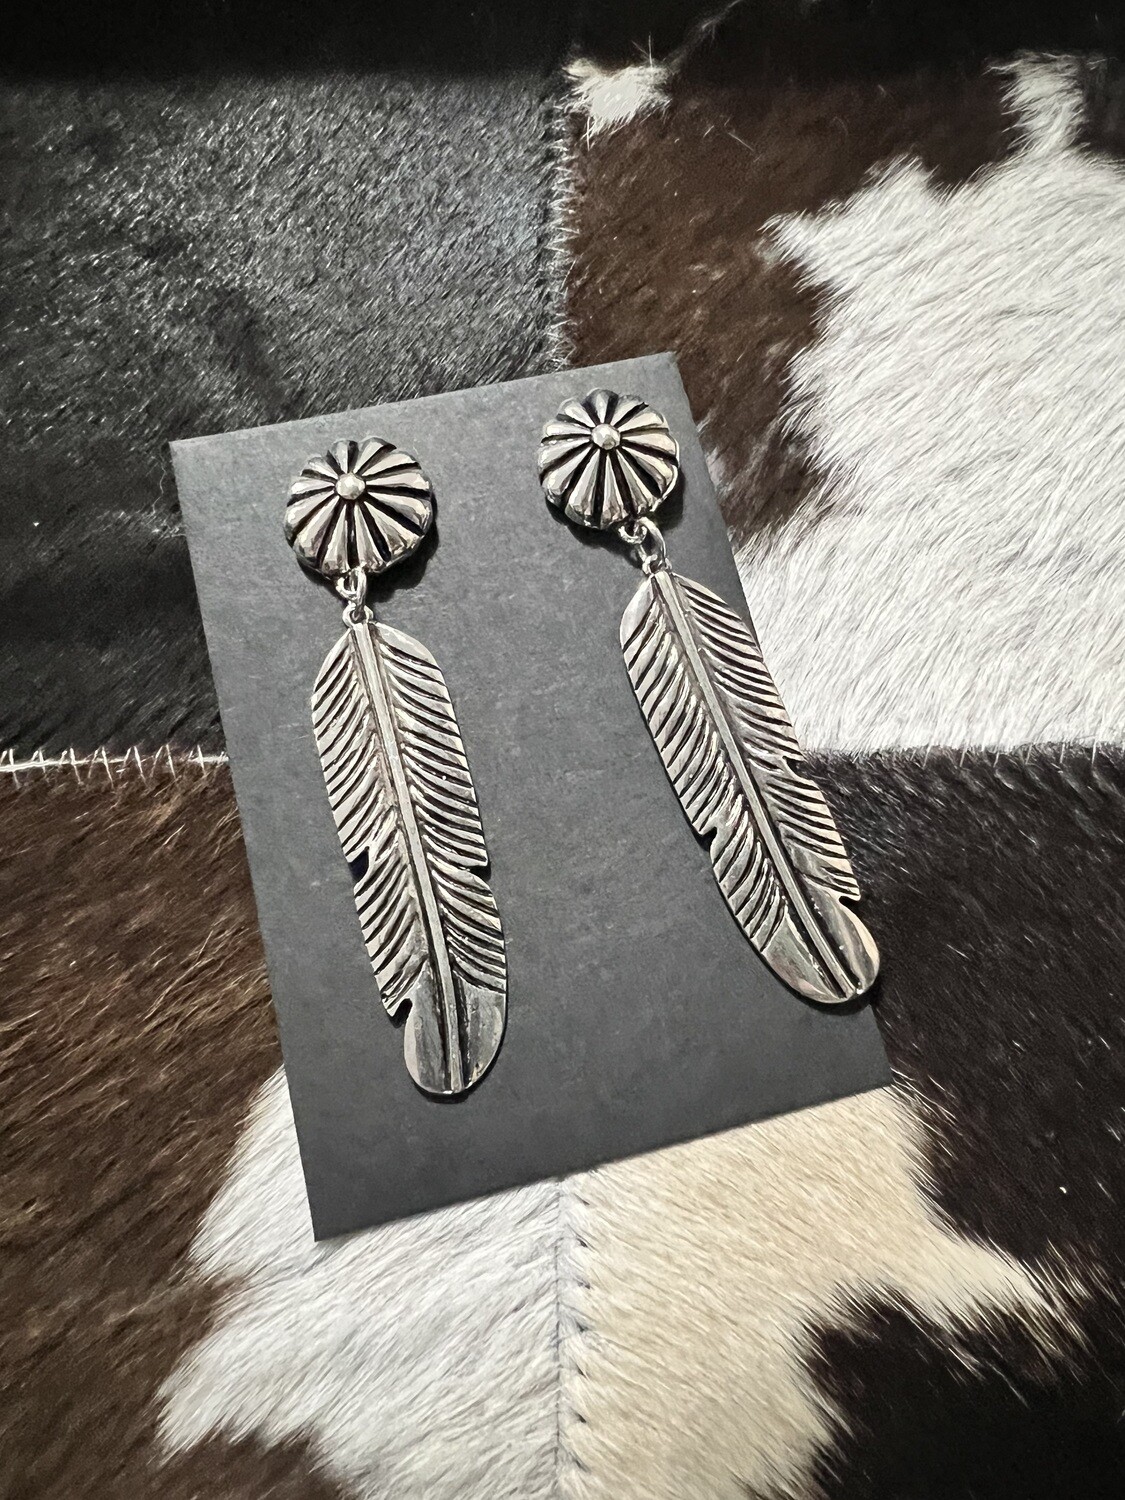 Silver Feather Post Earrings